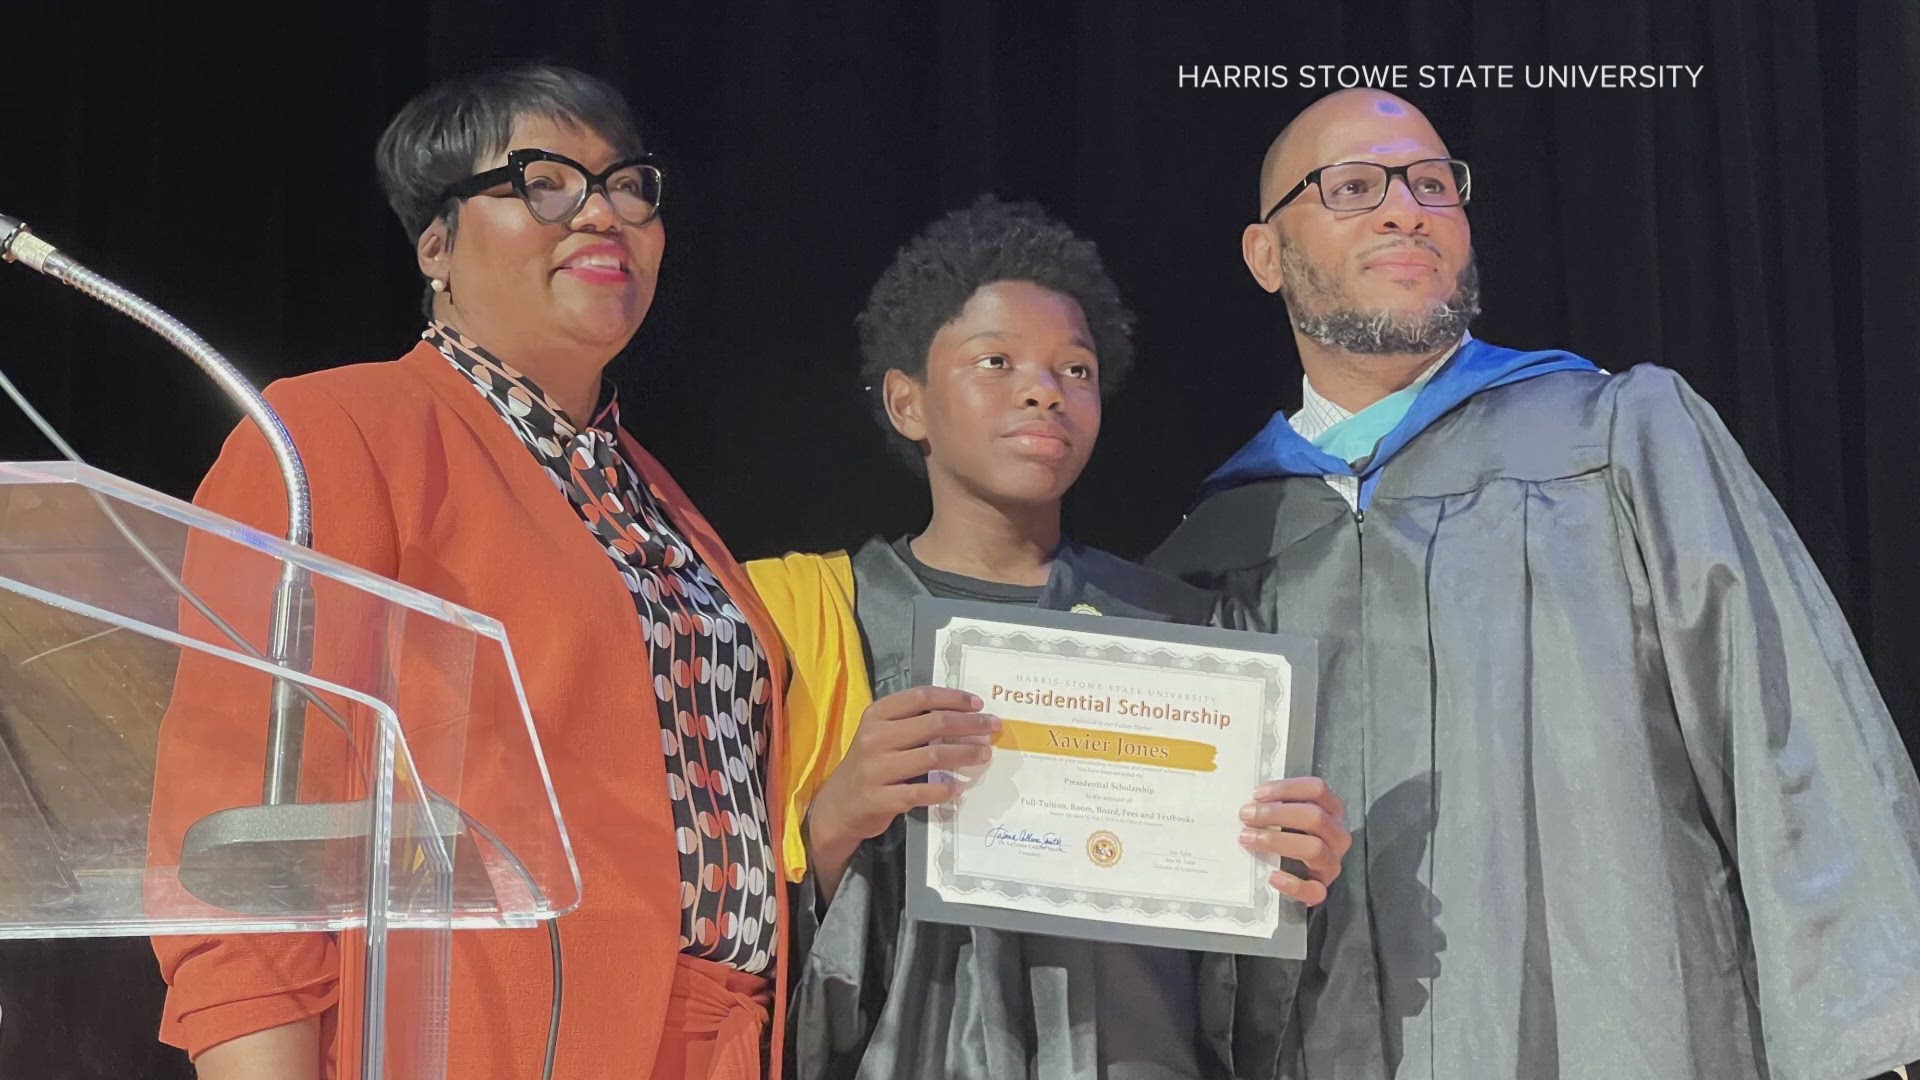 Xavier Jones walked to 6.5 miles to his middle school graduation in May. He was given a full ride scholarship to attend Harris Stowe State University for the journey